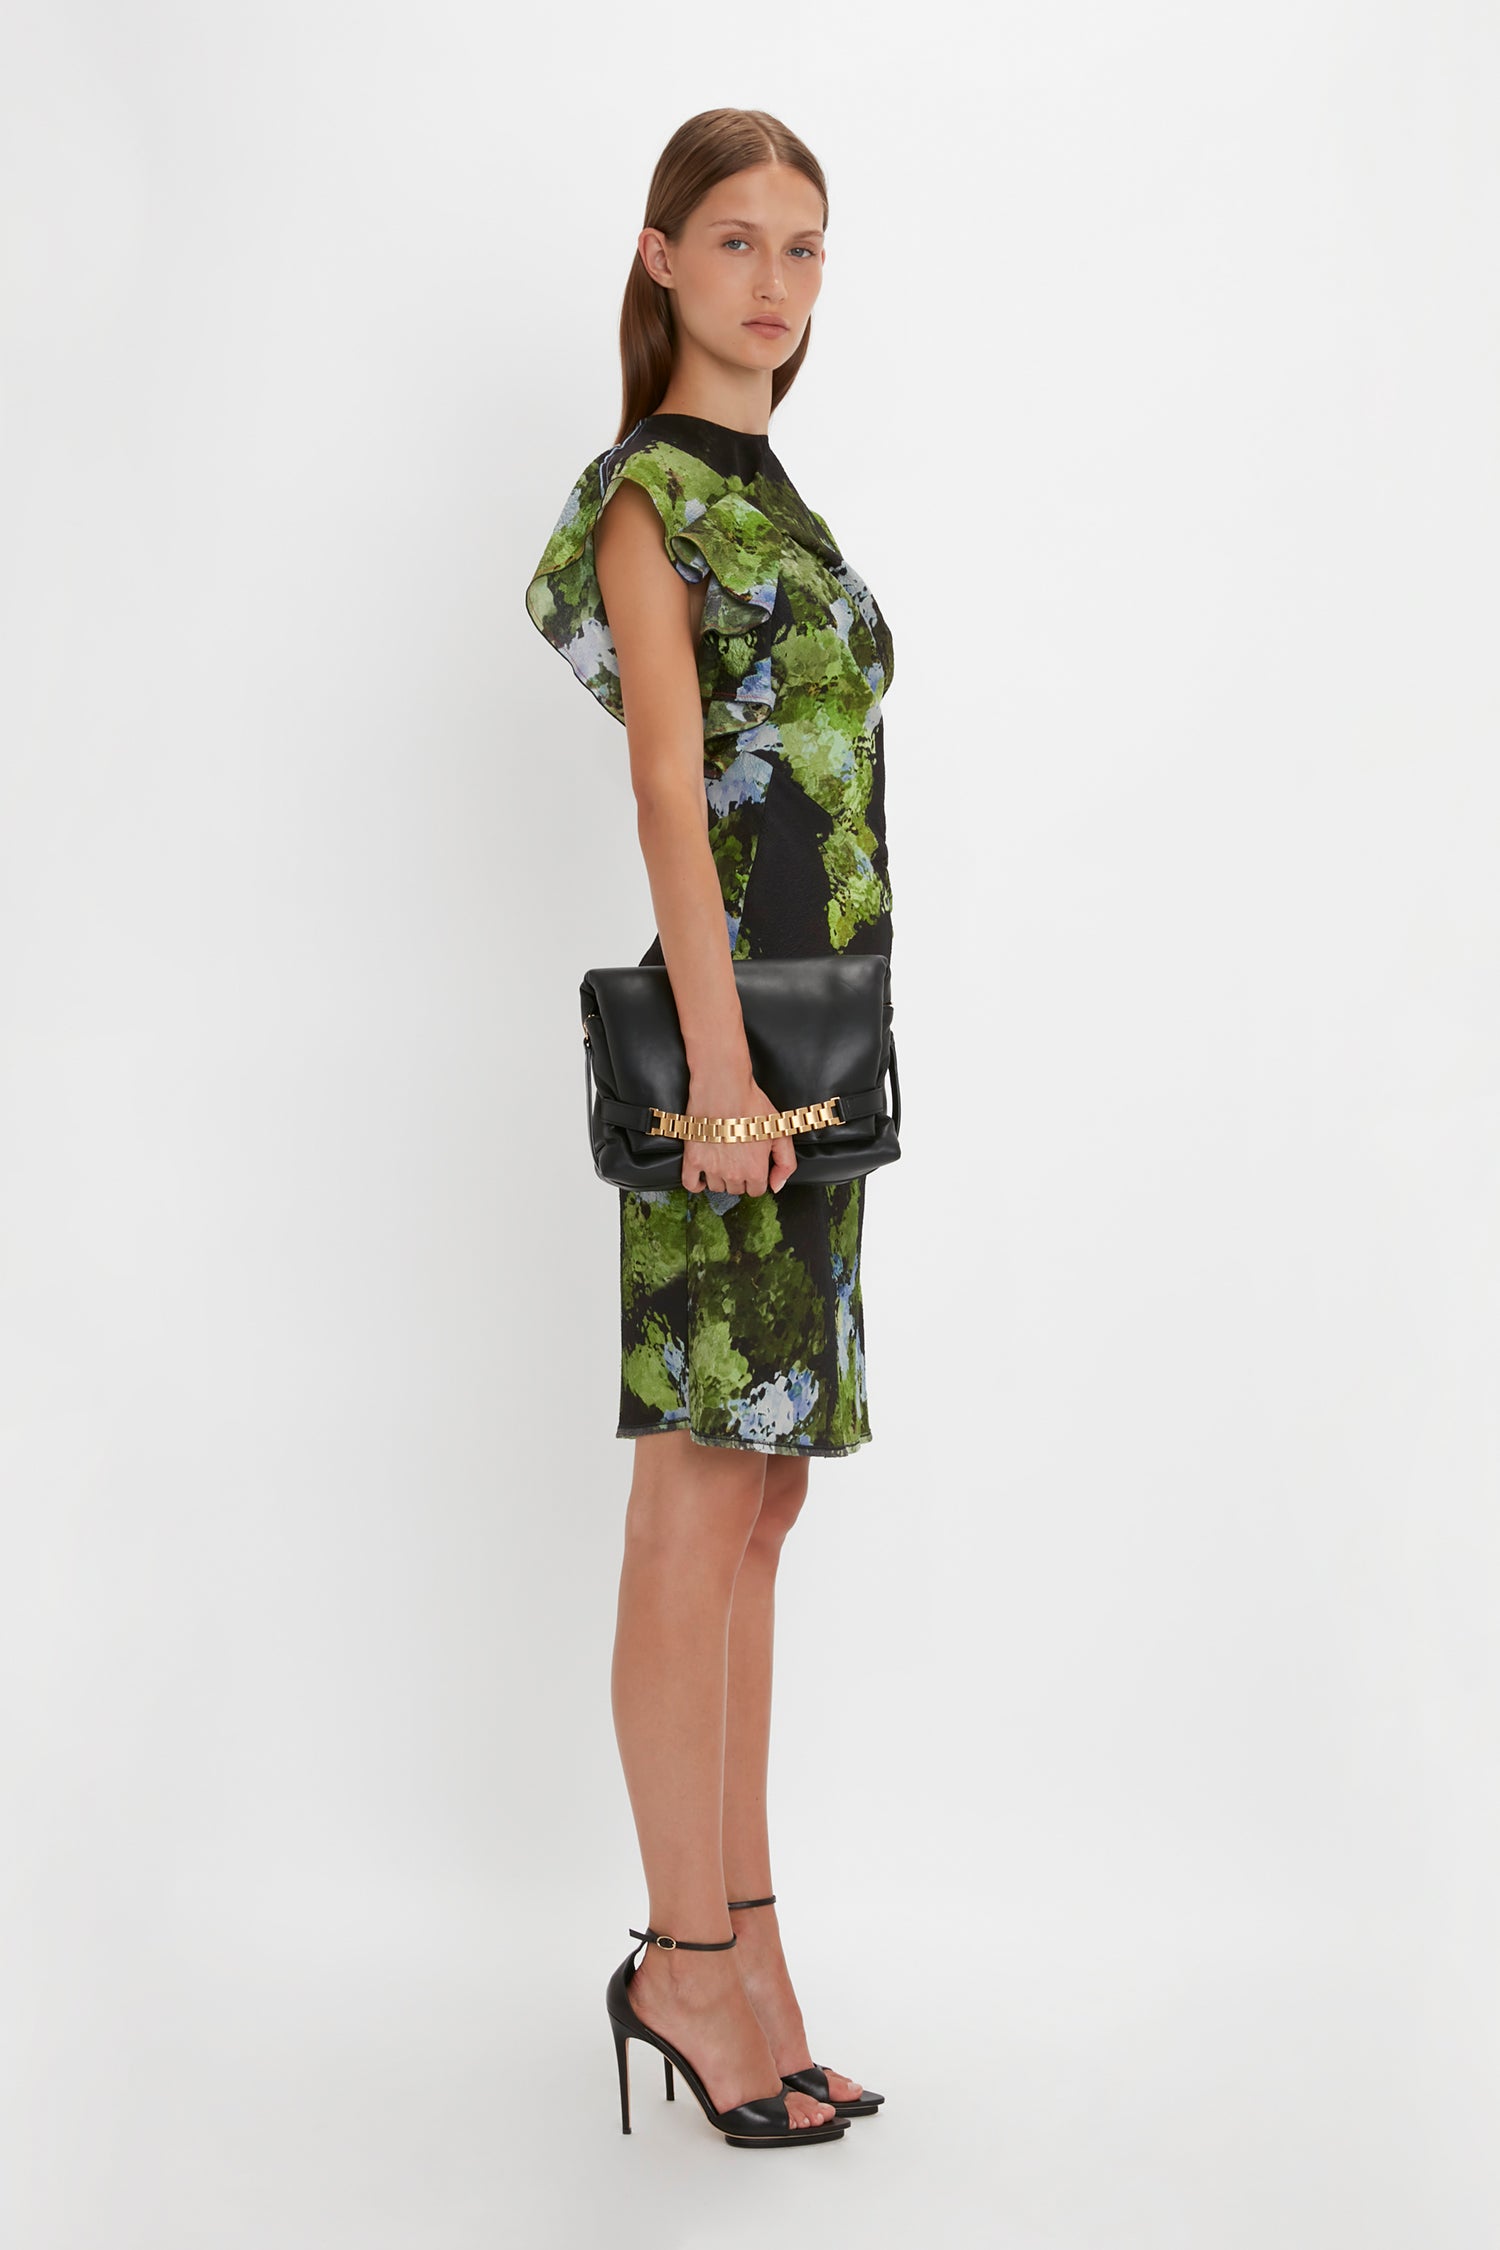 A woman modeling a green and black floral dress with capped sleeves and a Victoria Beckham Puffy Chain Pouch With Strap In Black Leather handbag, standing against a white background.